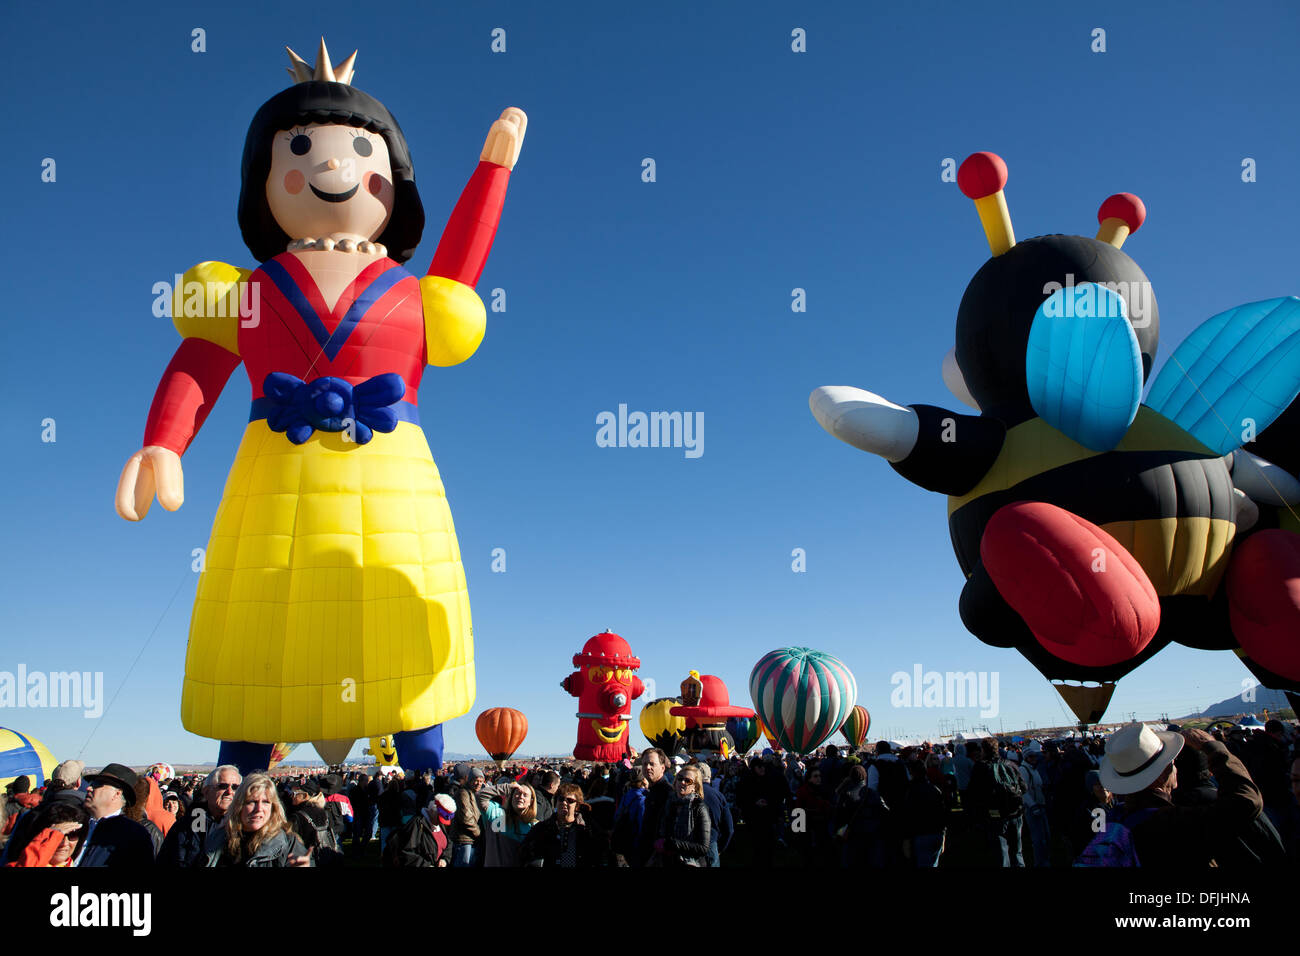 Albuquerque, NM, USA. 5th Oct, 2013. . The Snow White Balloon waves as she prepares for flight, First day of mass ascension at Albuquerque International Balloon Fiesta on Saturday October 5, 2013. Albuquerque, New Mexico, USA. Credit:  Christina Kennedy/Alamy Live News Stock Photo